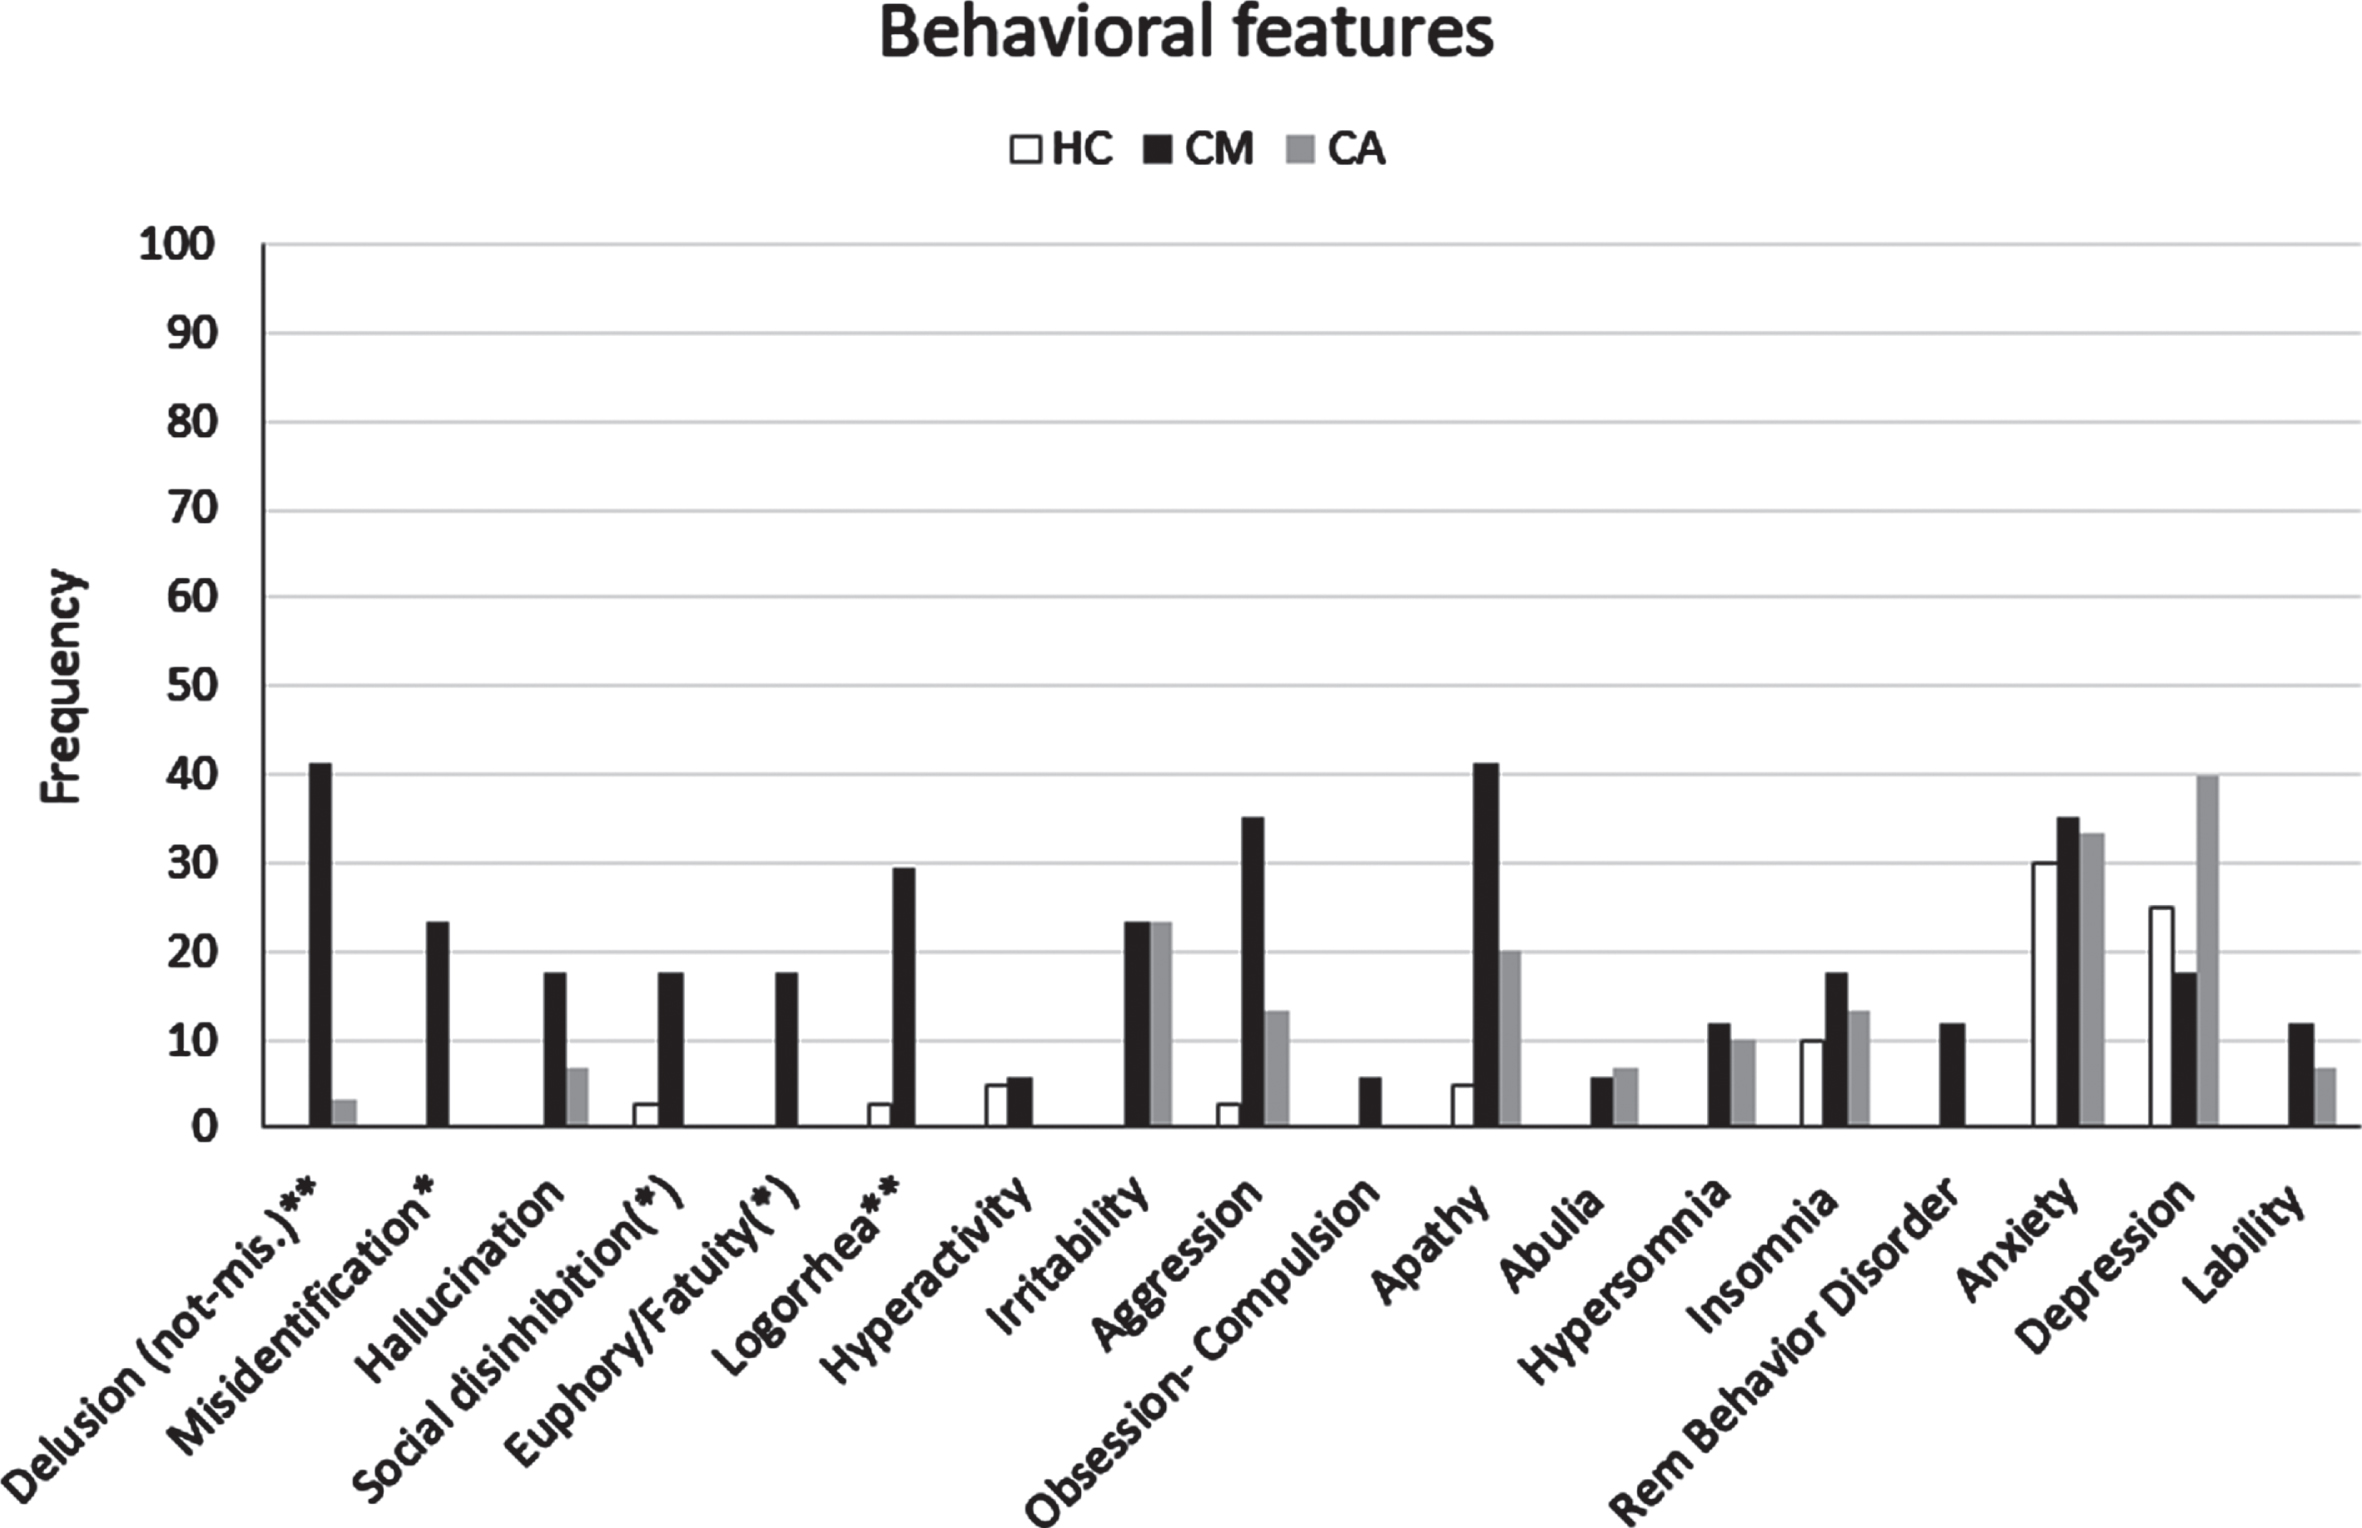 Frequency of behavioral features detected by clinical assessment (informant report and/or NPE) in the CM-AD group of patients compared to those in the CA-AD and HC group. *indicates a statistically significant difference CM > CA at p < 0.05. **indicates a statistically significant difference CM > CA at p < 0.01. (*) indicates a difference CM > CA with tendency to significance.